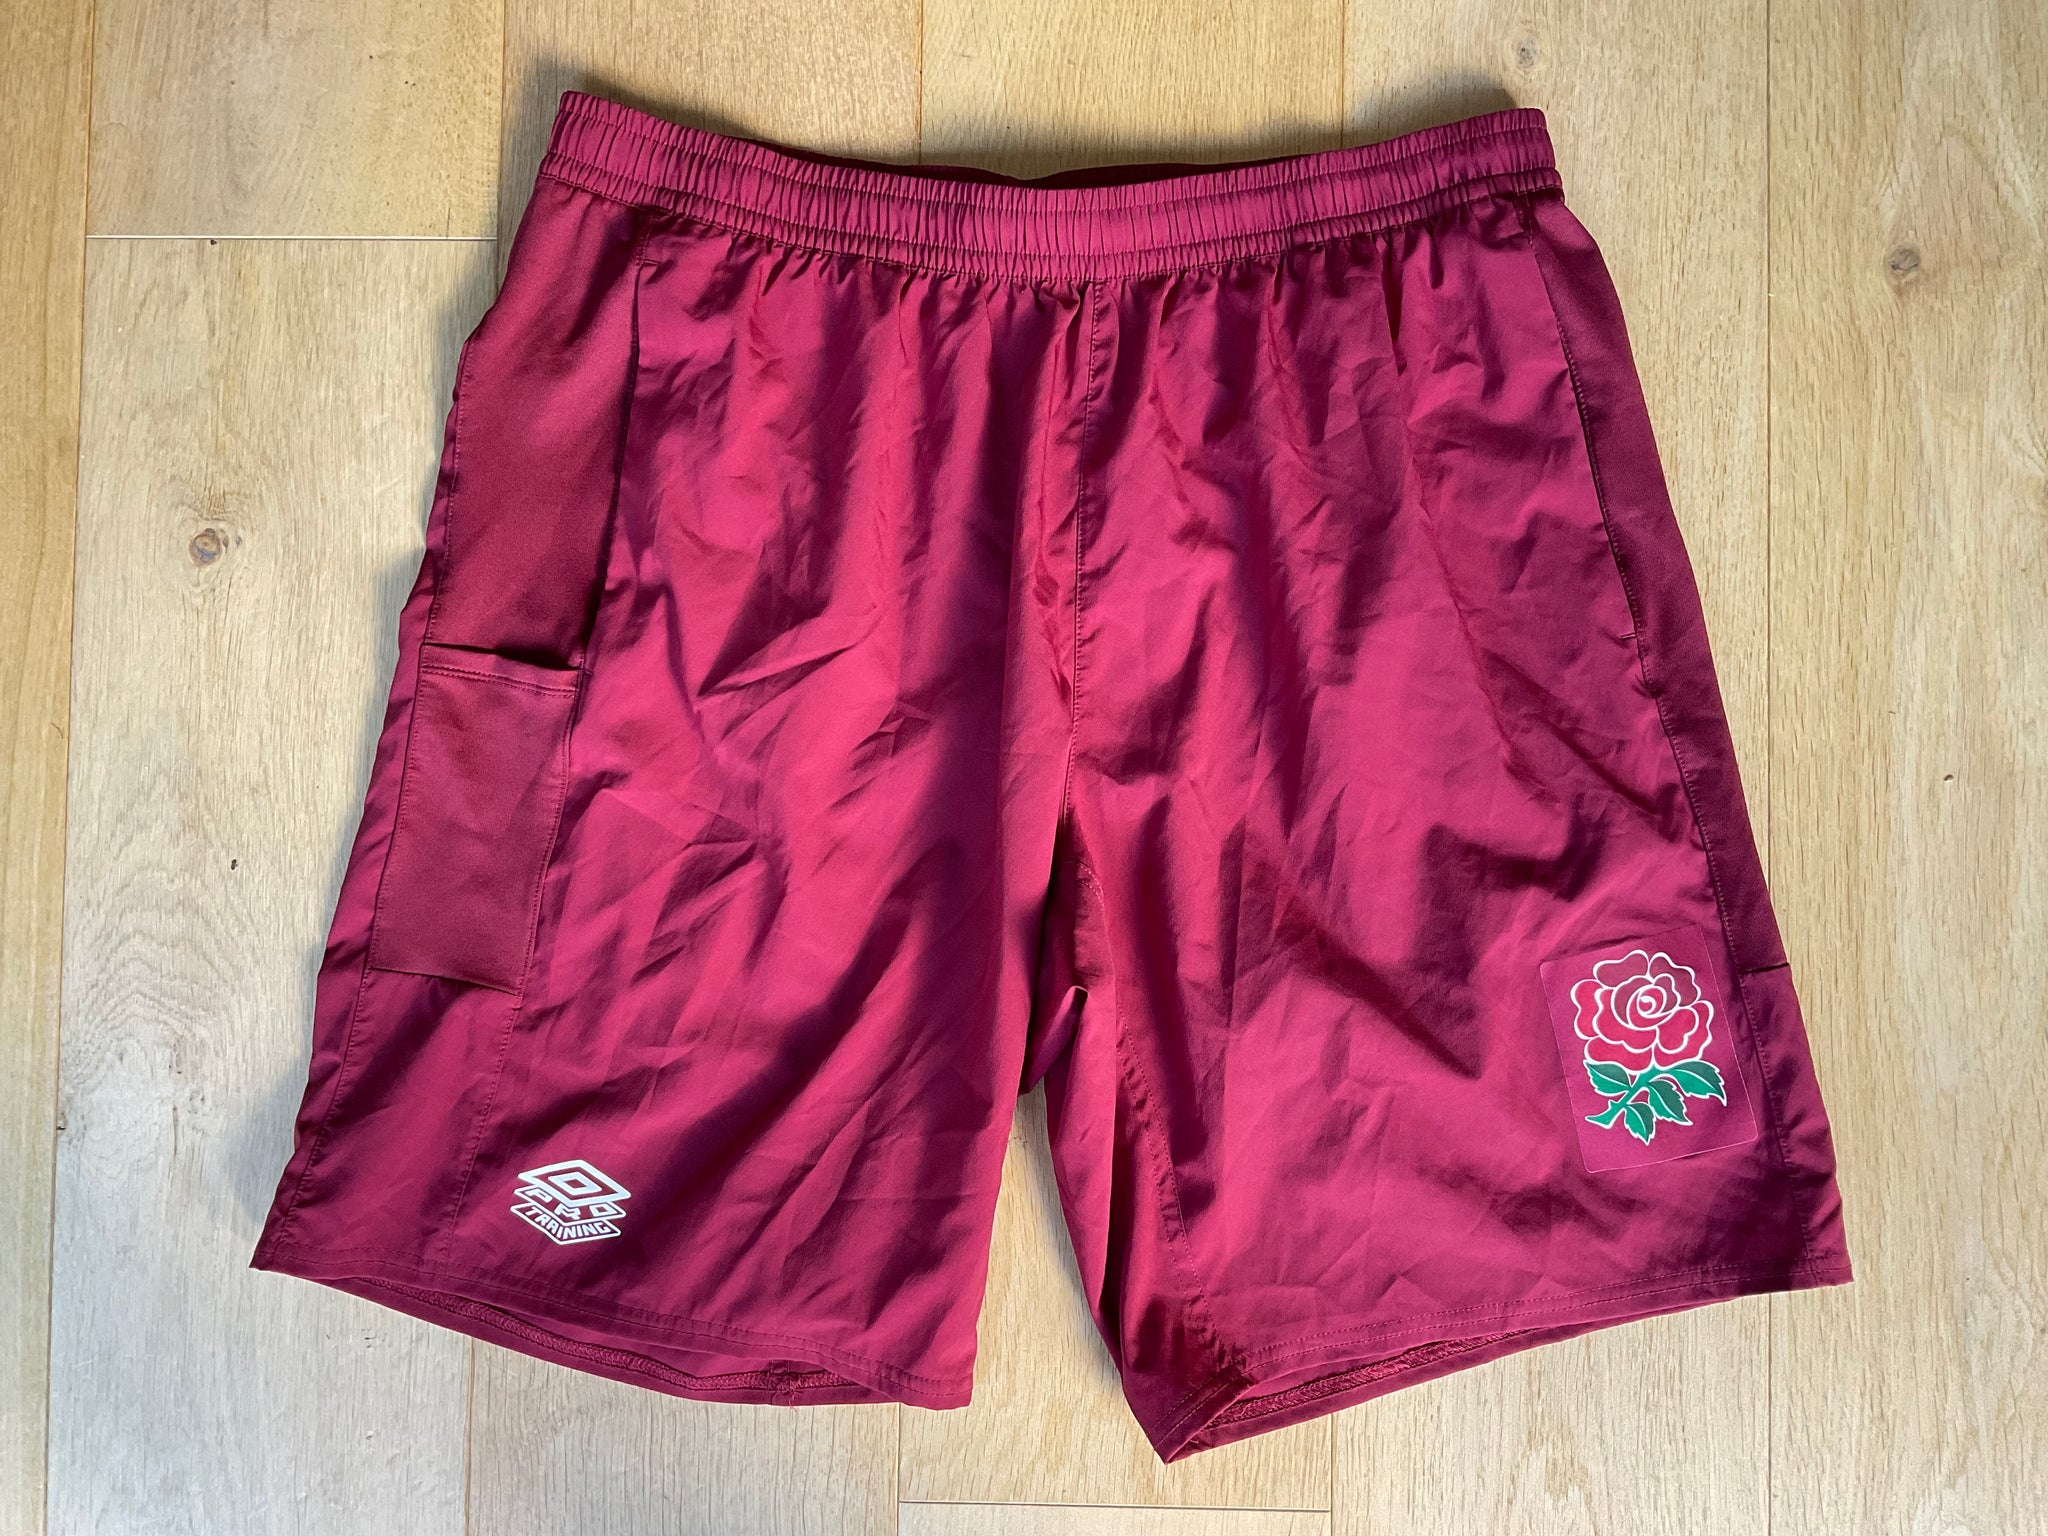 England Rugby -Gym Shorts [Russet]